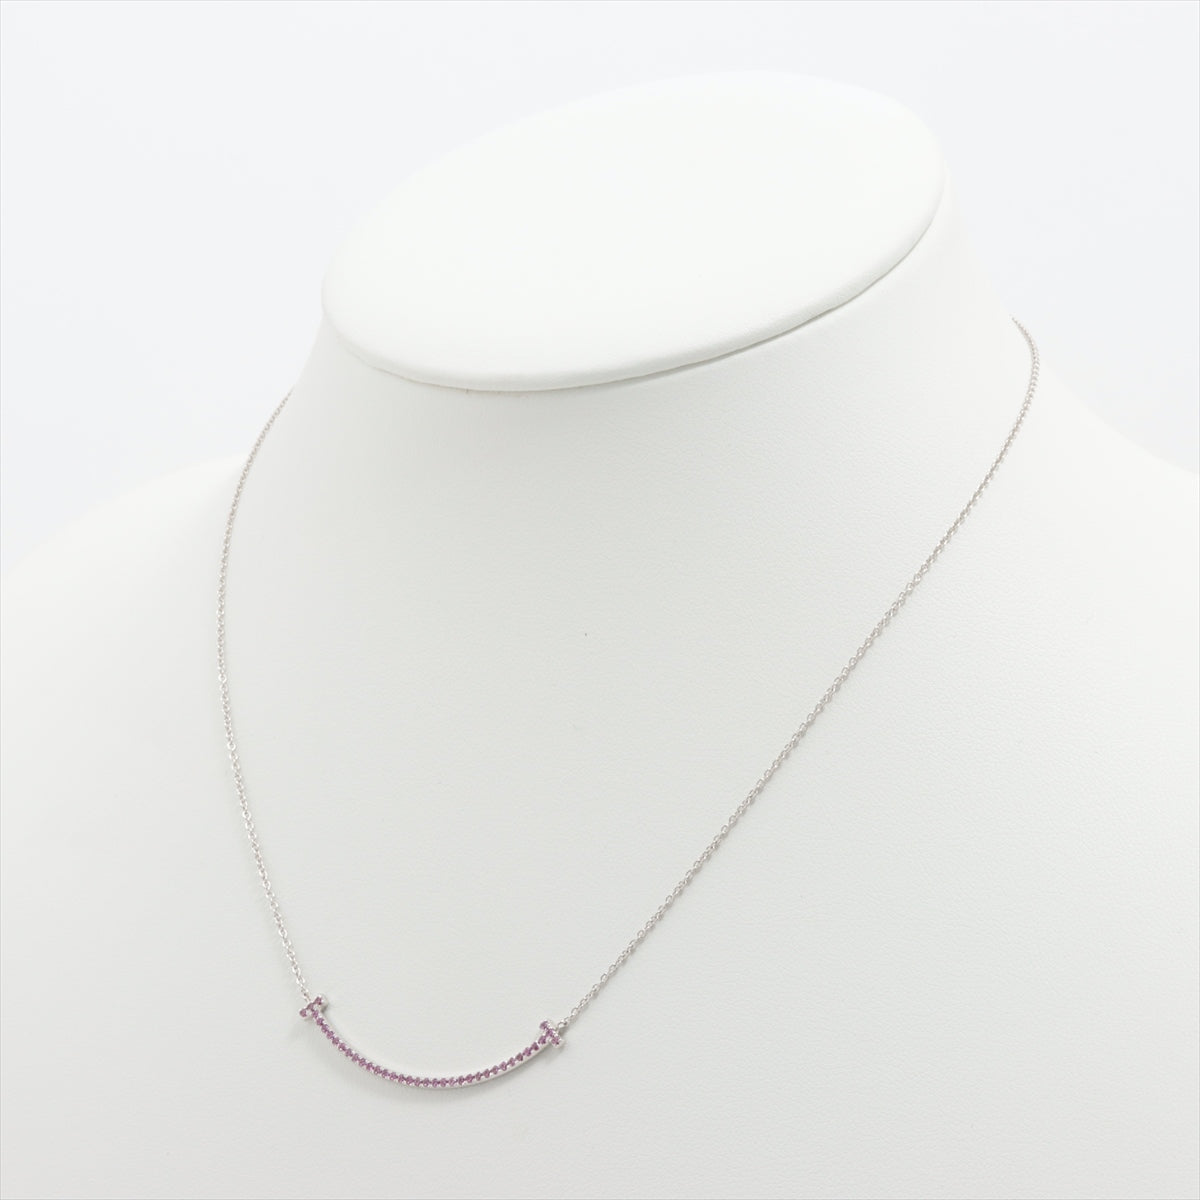 Tiffany T Smile Mini Pink sapphire Necklace 750(WG) 2.6g